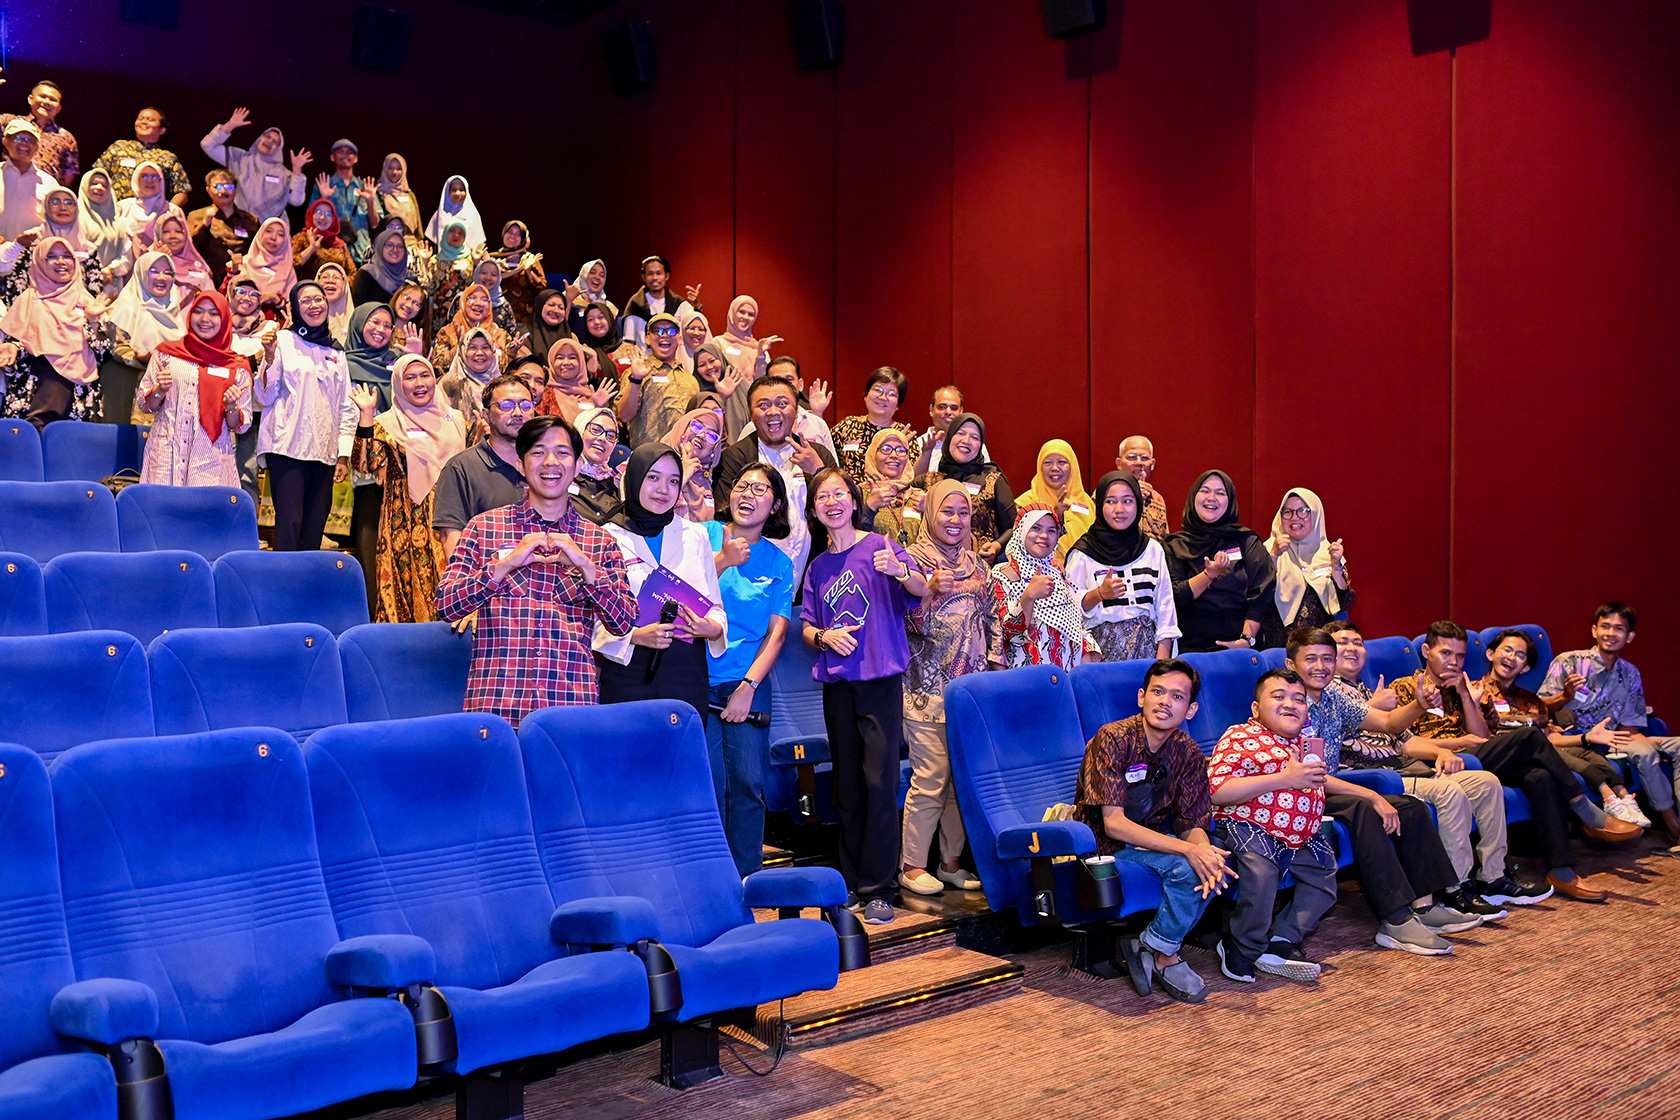 The ‘Nobar’ with OzAlum in Padang sees over 80 alumni who come together for an evening of food, drinks, and a shared Australian film experience.